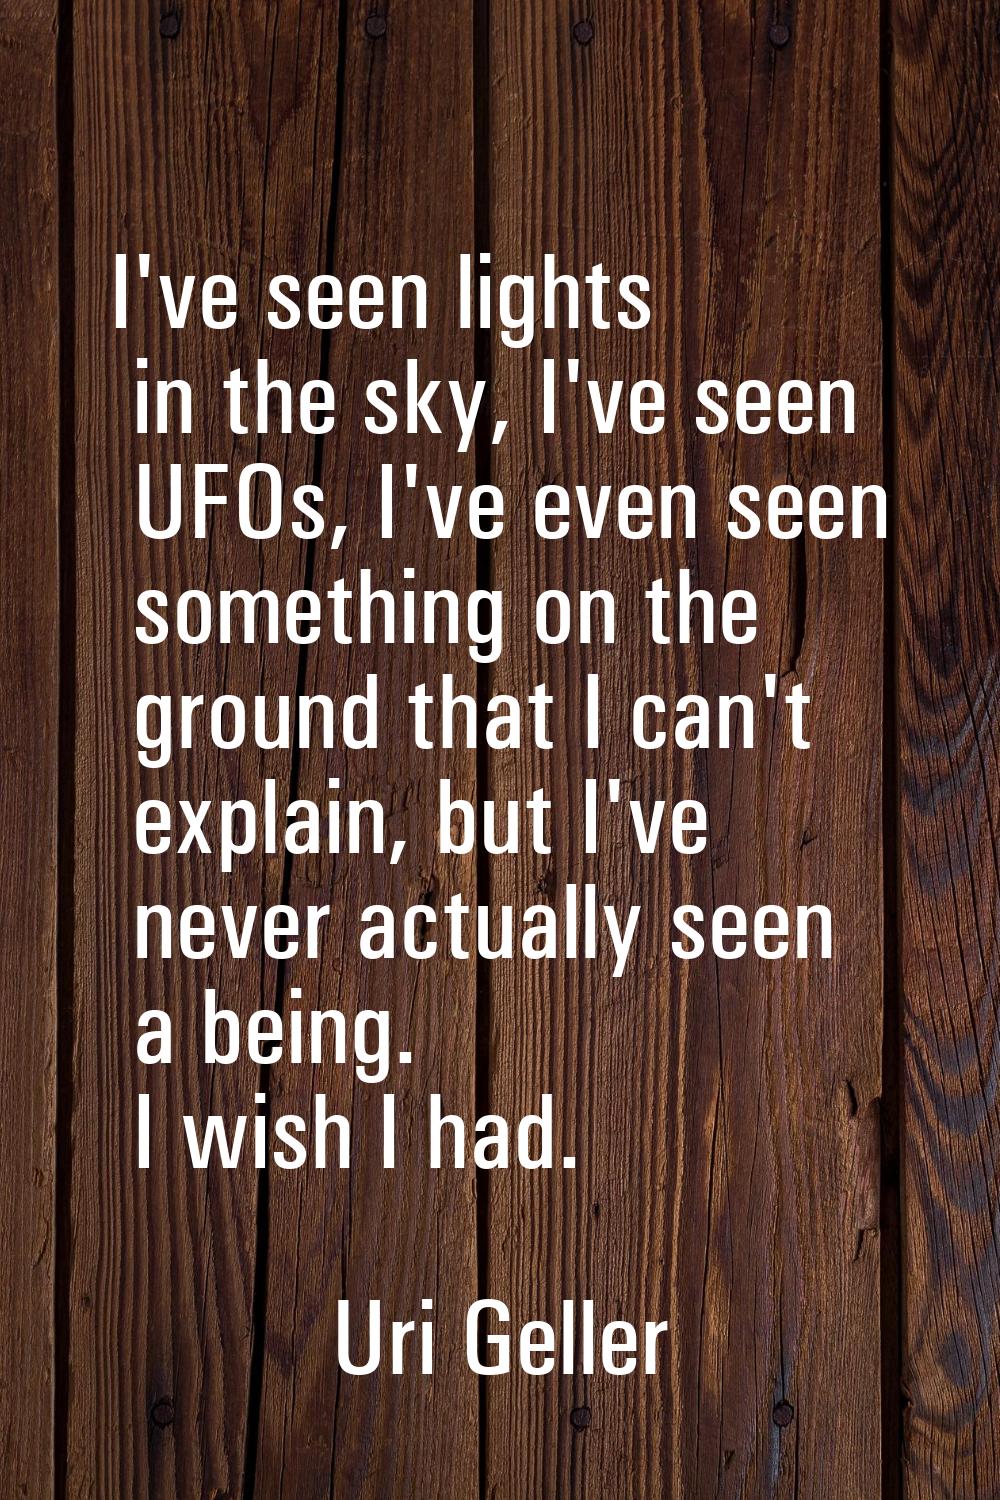 I've seen lights in the sky, I've seen UFOs, I've even seen something on the ground that I can't ex